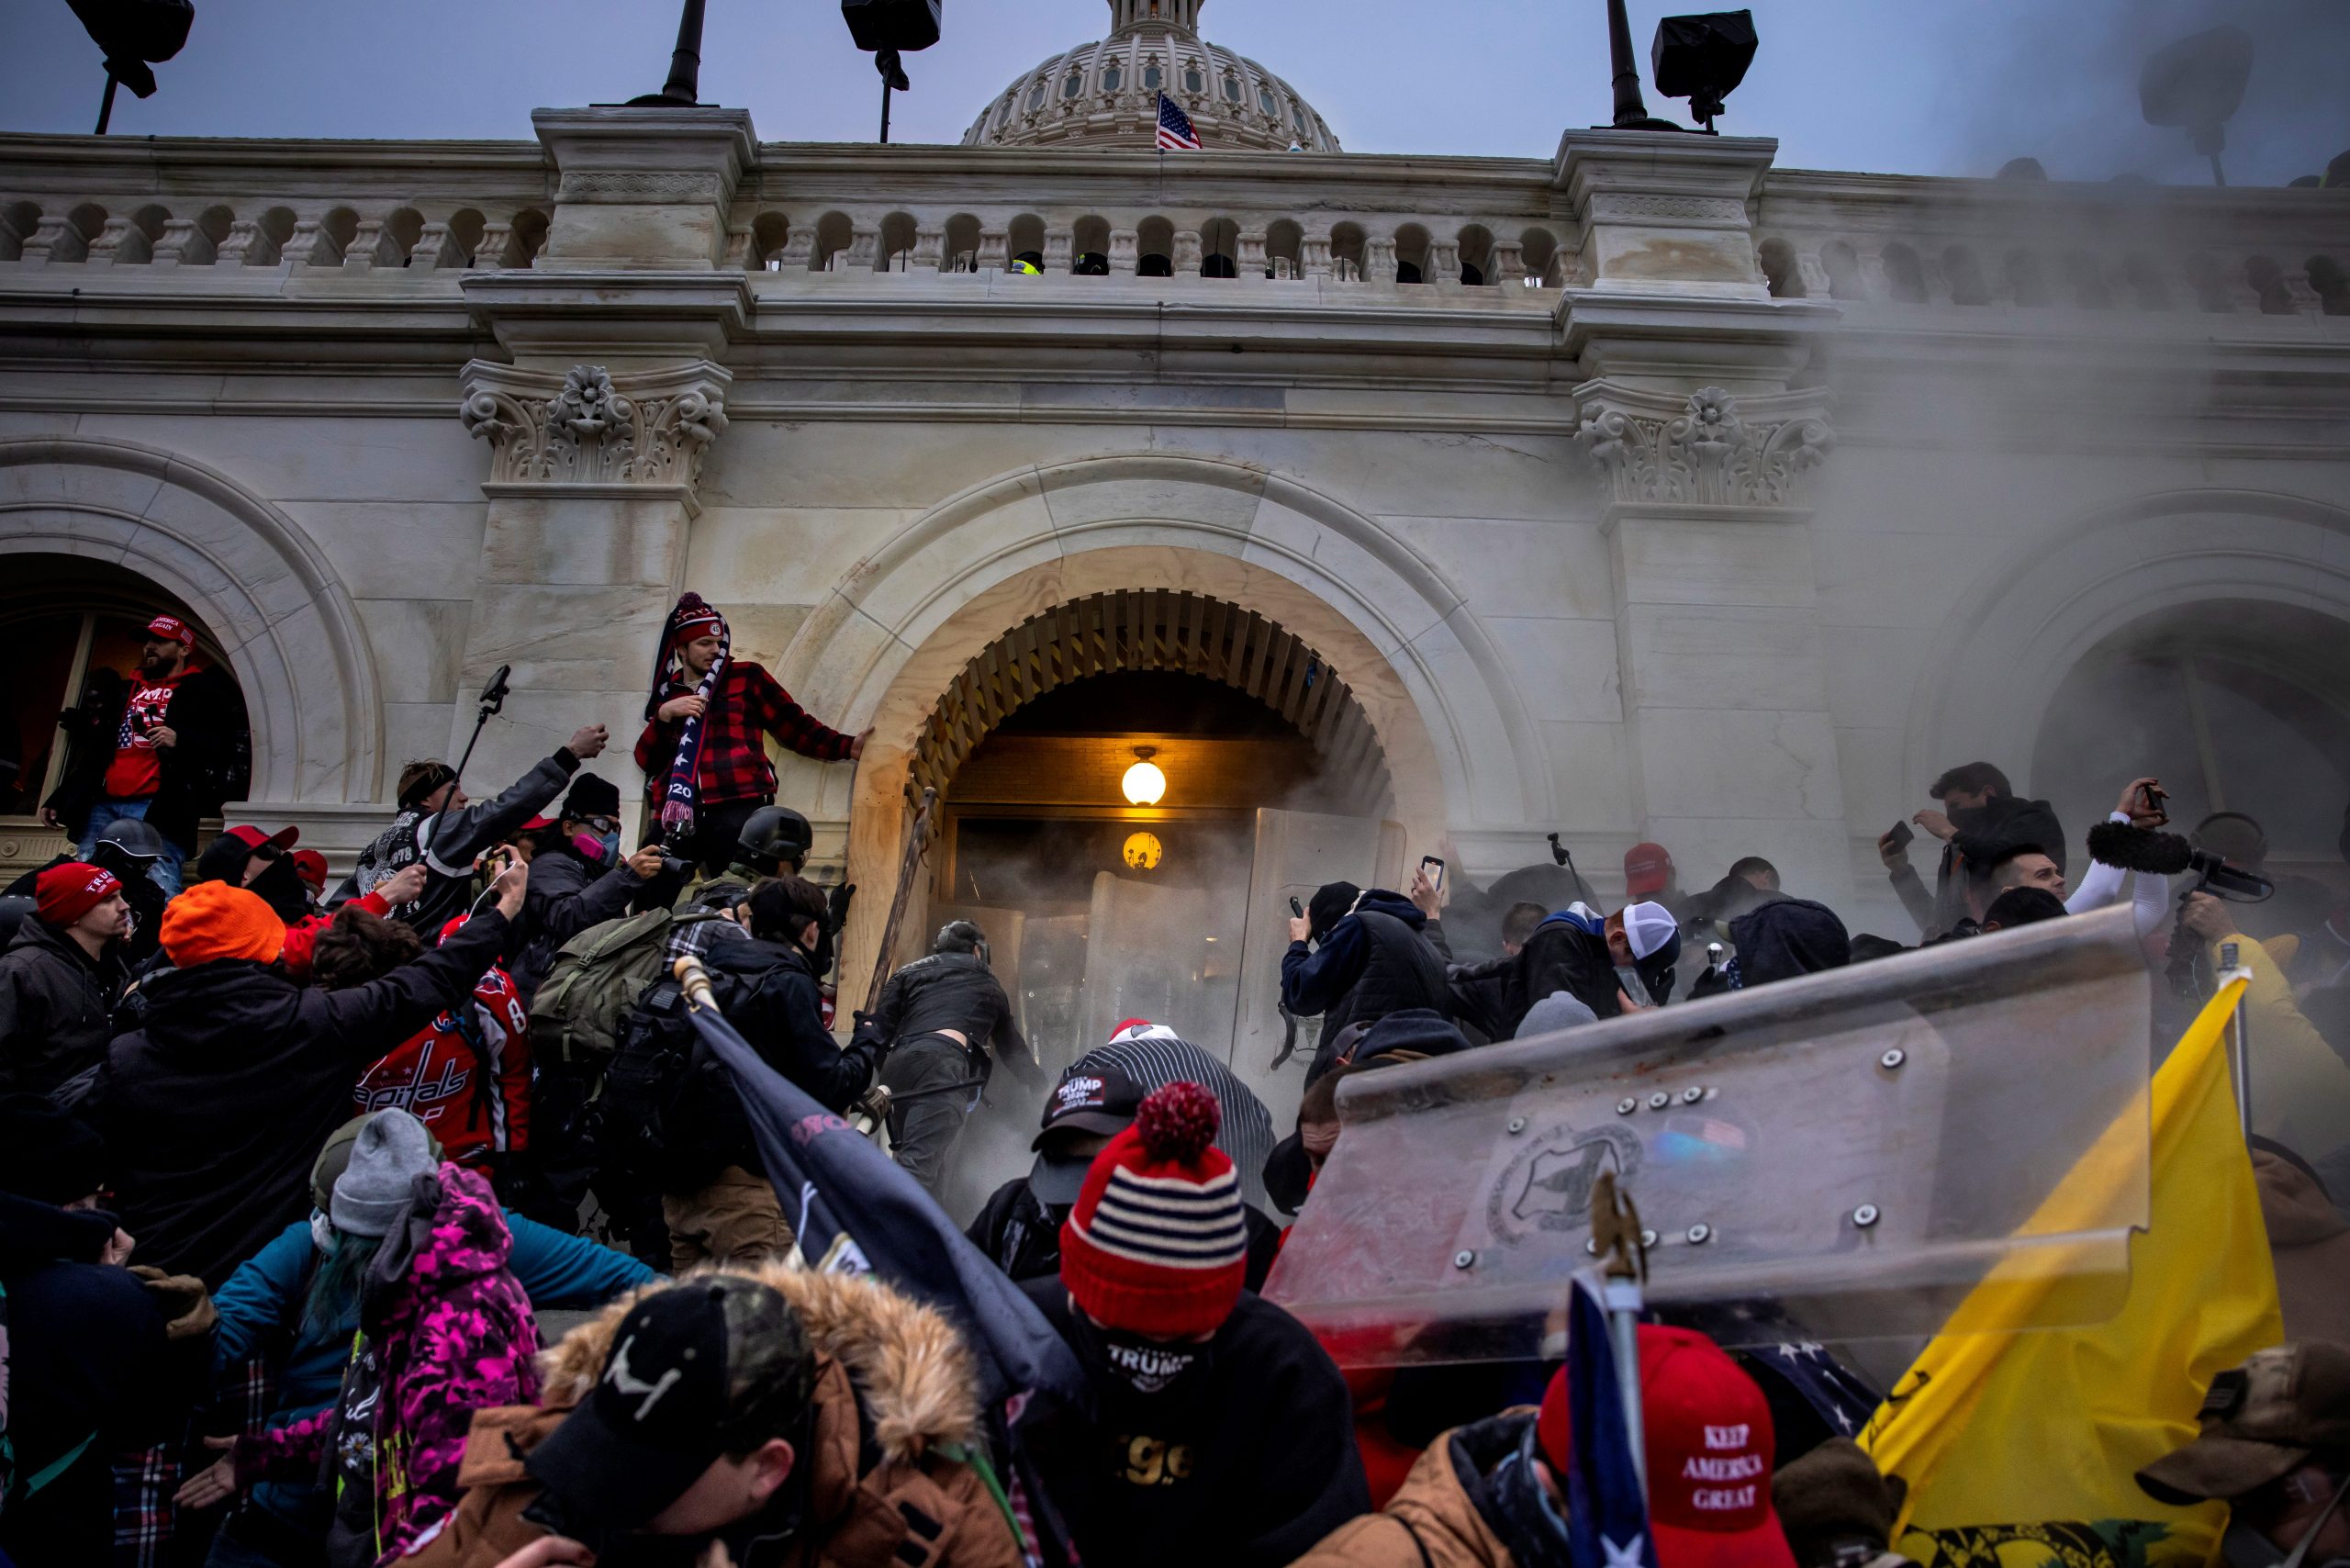 Trump supporters attempt to enter the Capitol during the Jan 6 attack